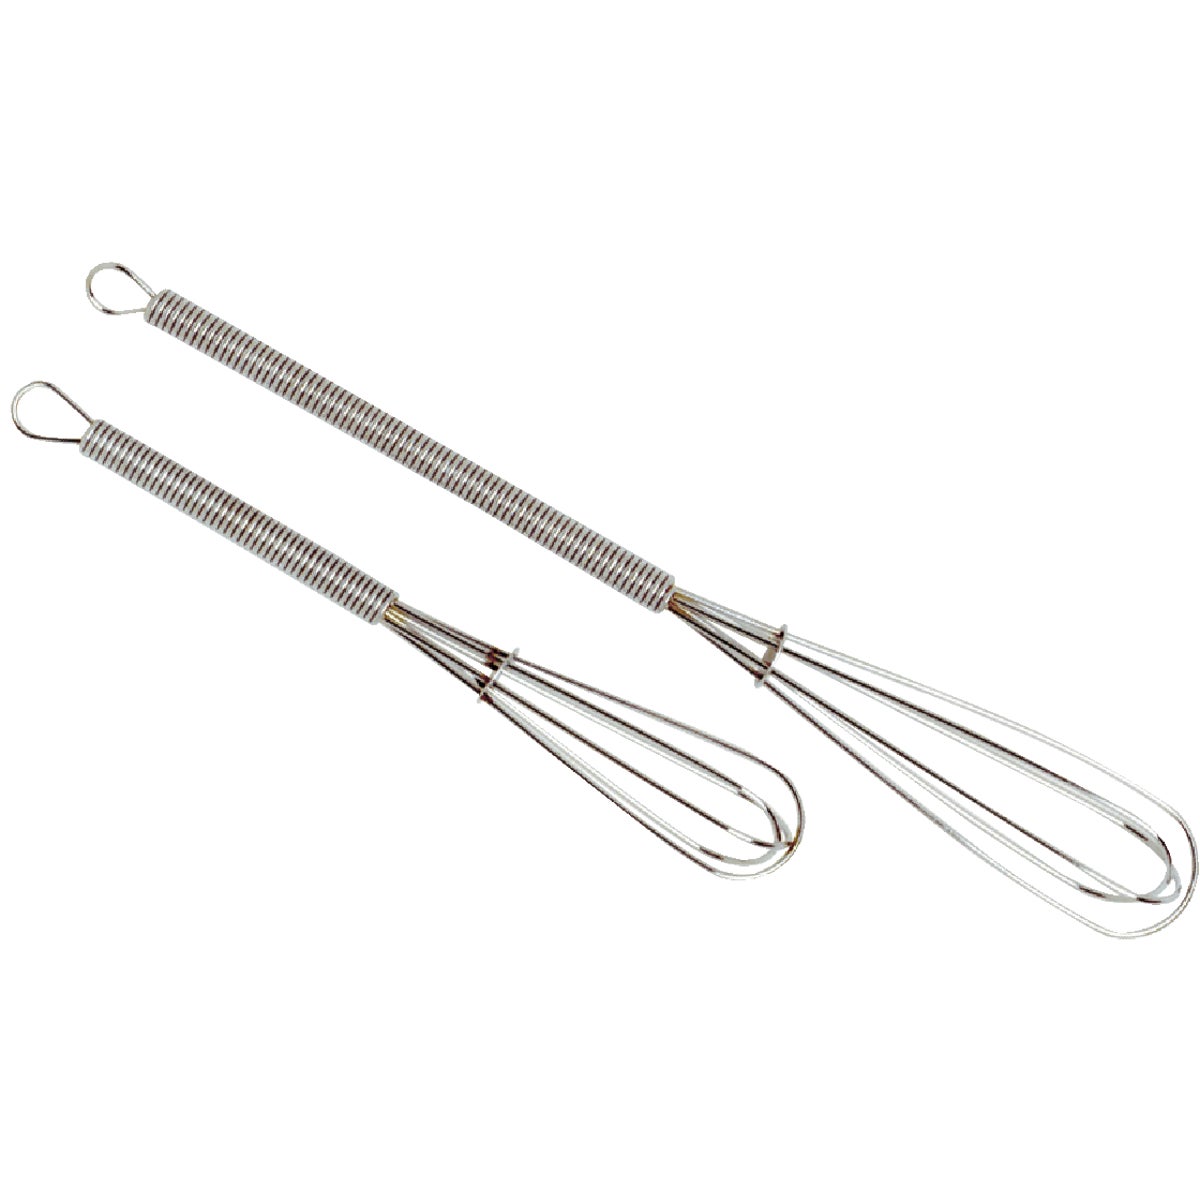 Item 640883, Chrome plated wire whisks whip or stir salad dressings, sauces and more.